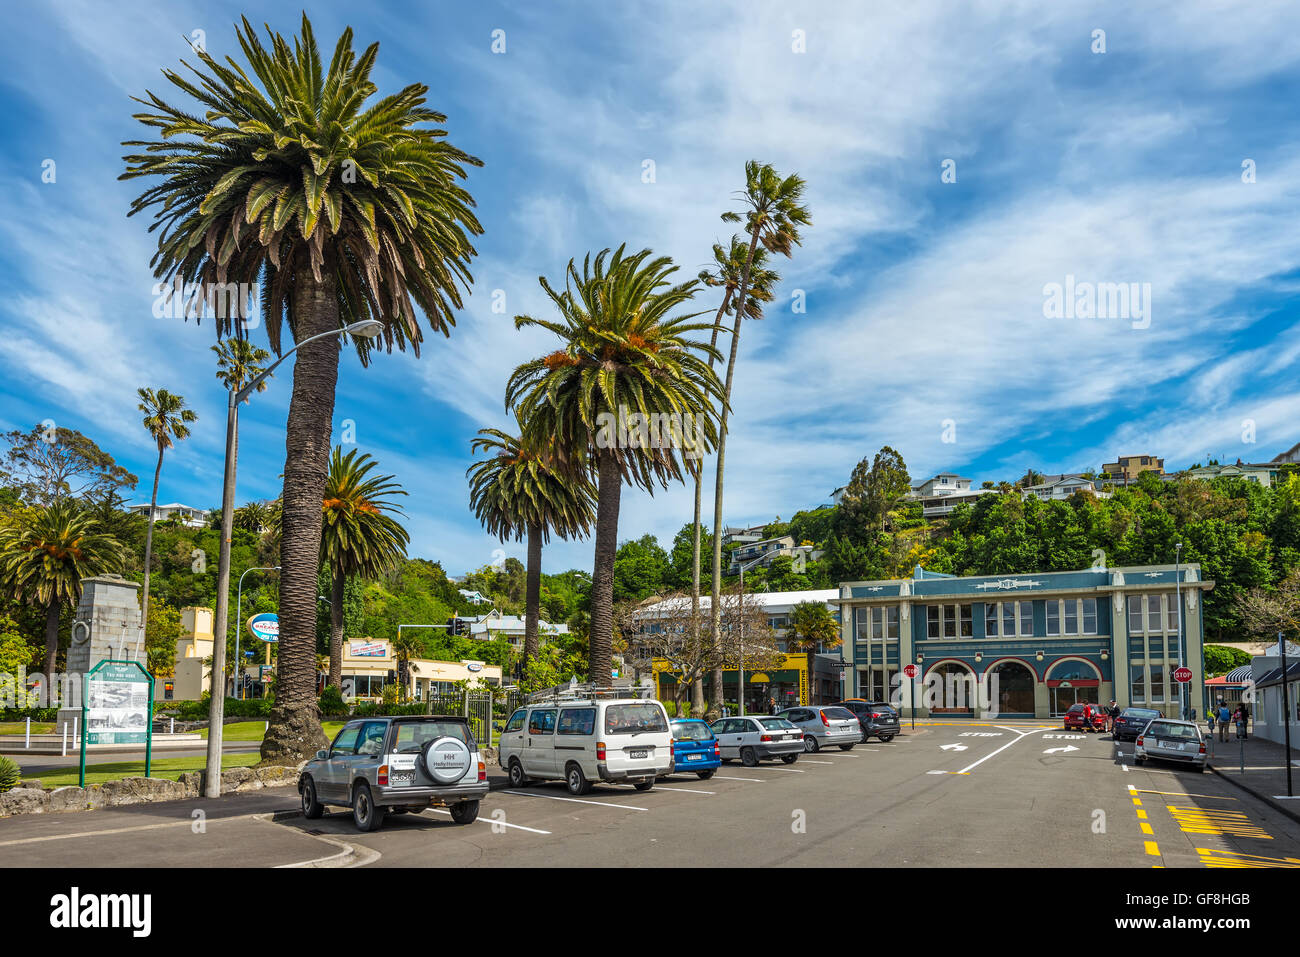 Napier, New Zealand - November 19, 2014: People walking around Clive Square East - Napier, Hawkes Bay, North Island, New Zealand Stock Photo